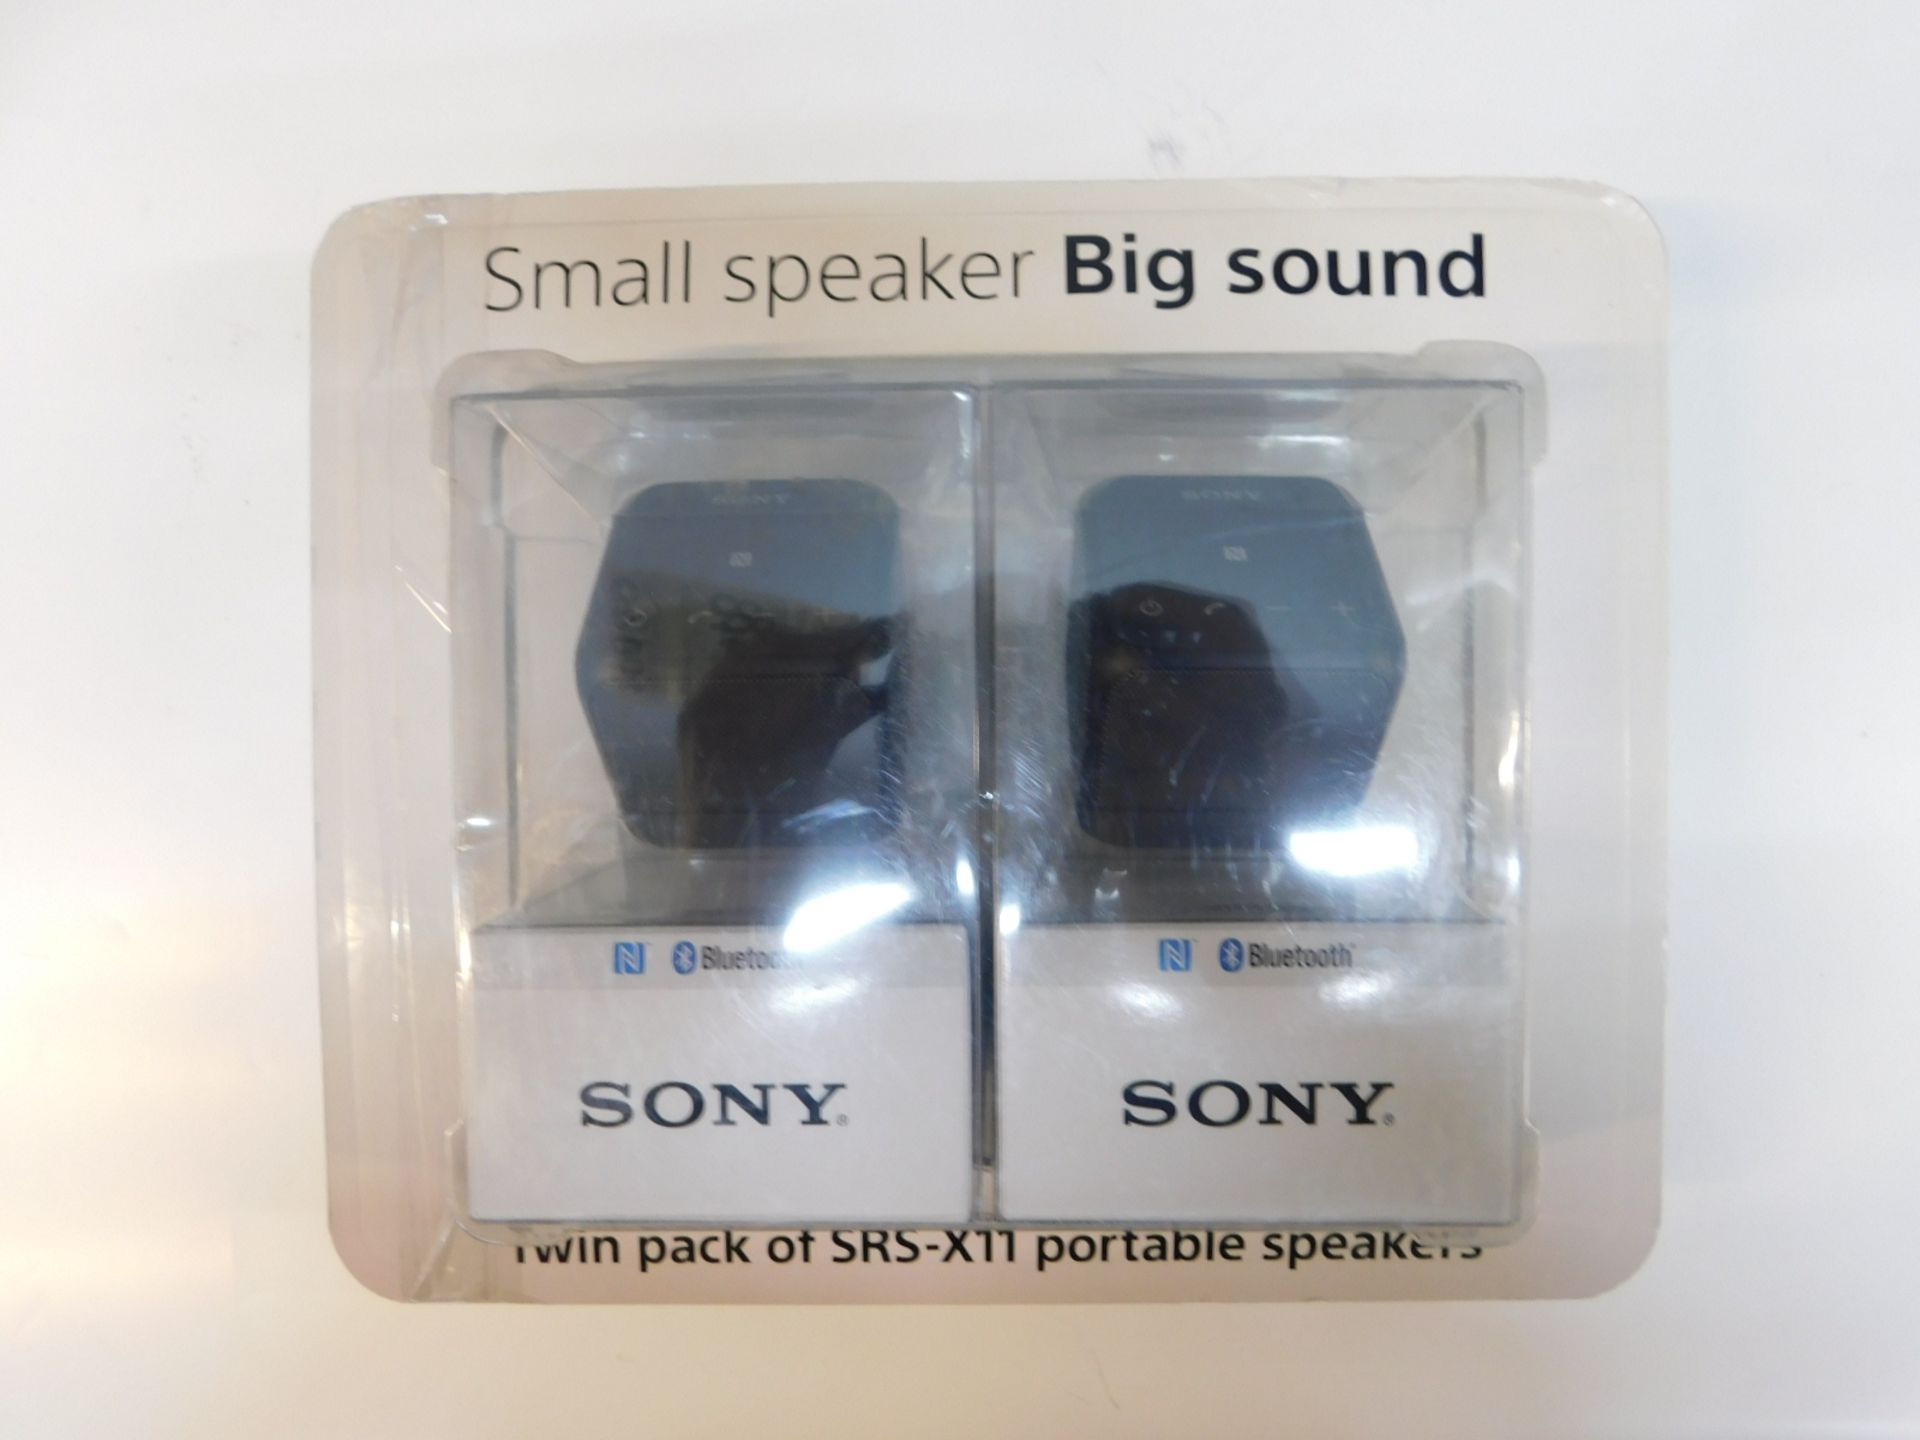 1 BOXED SET OF 2 SONY SRS-X11 PORTABLE SPEAKER RRP £129.99